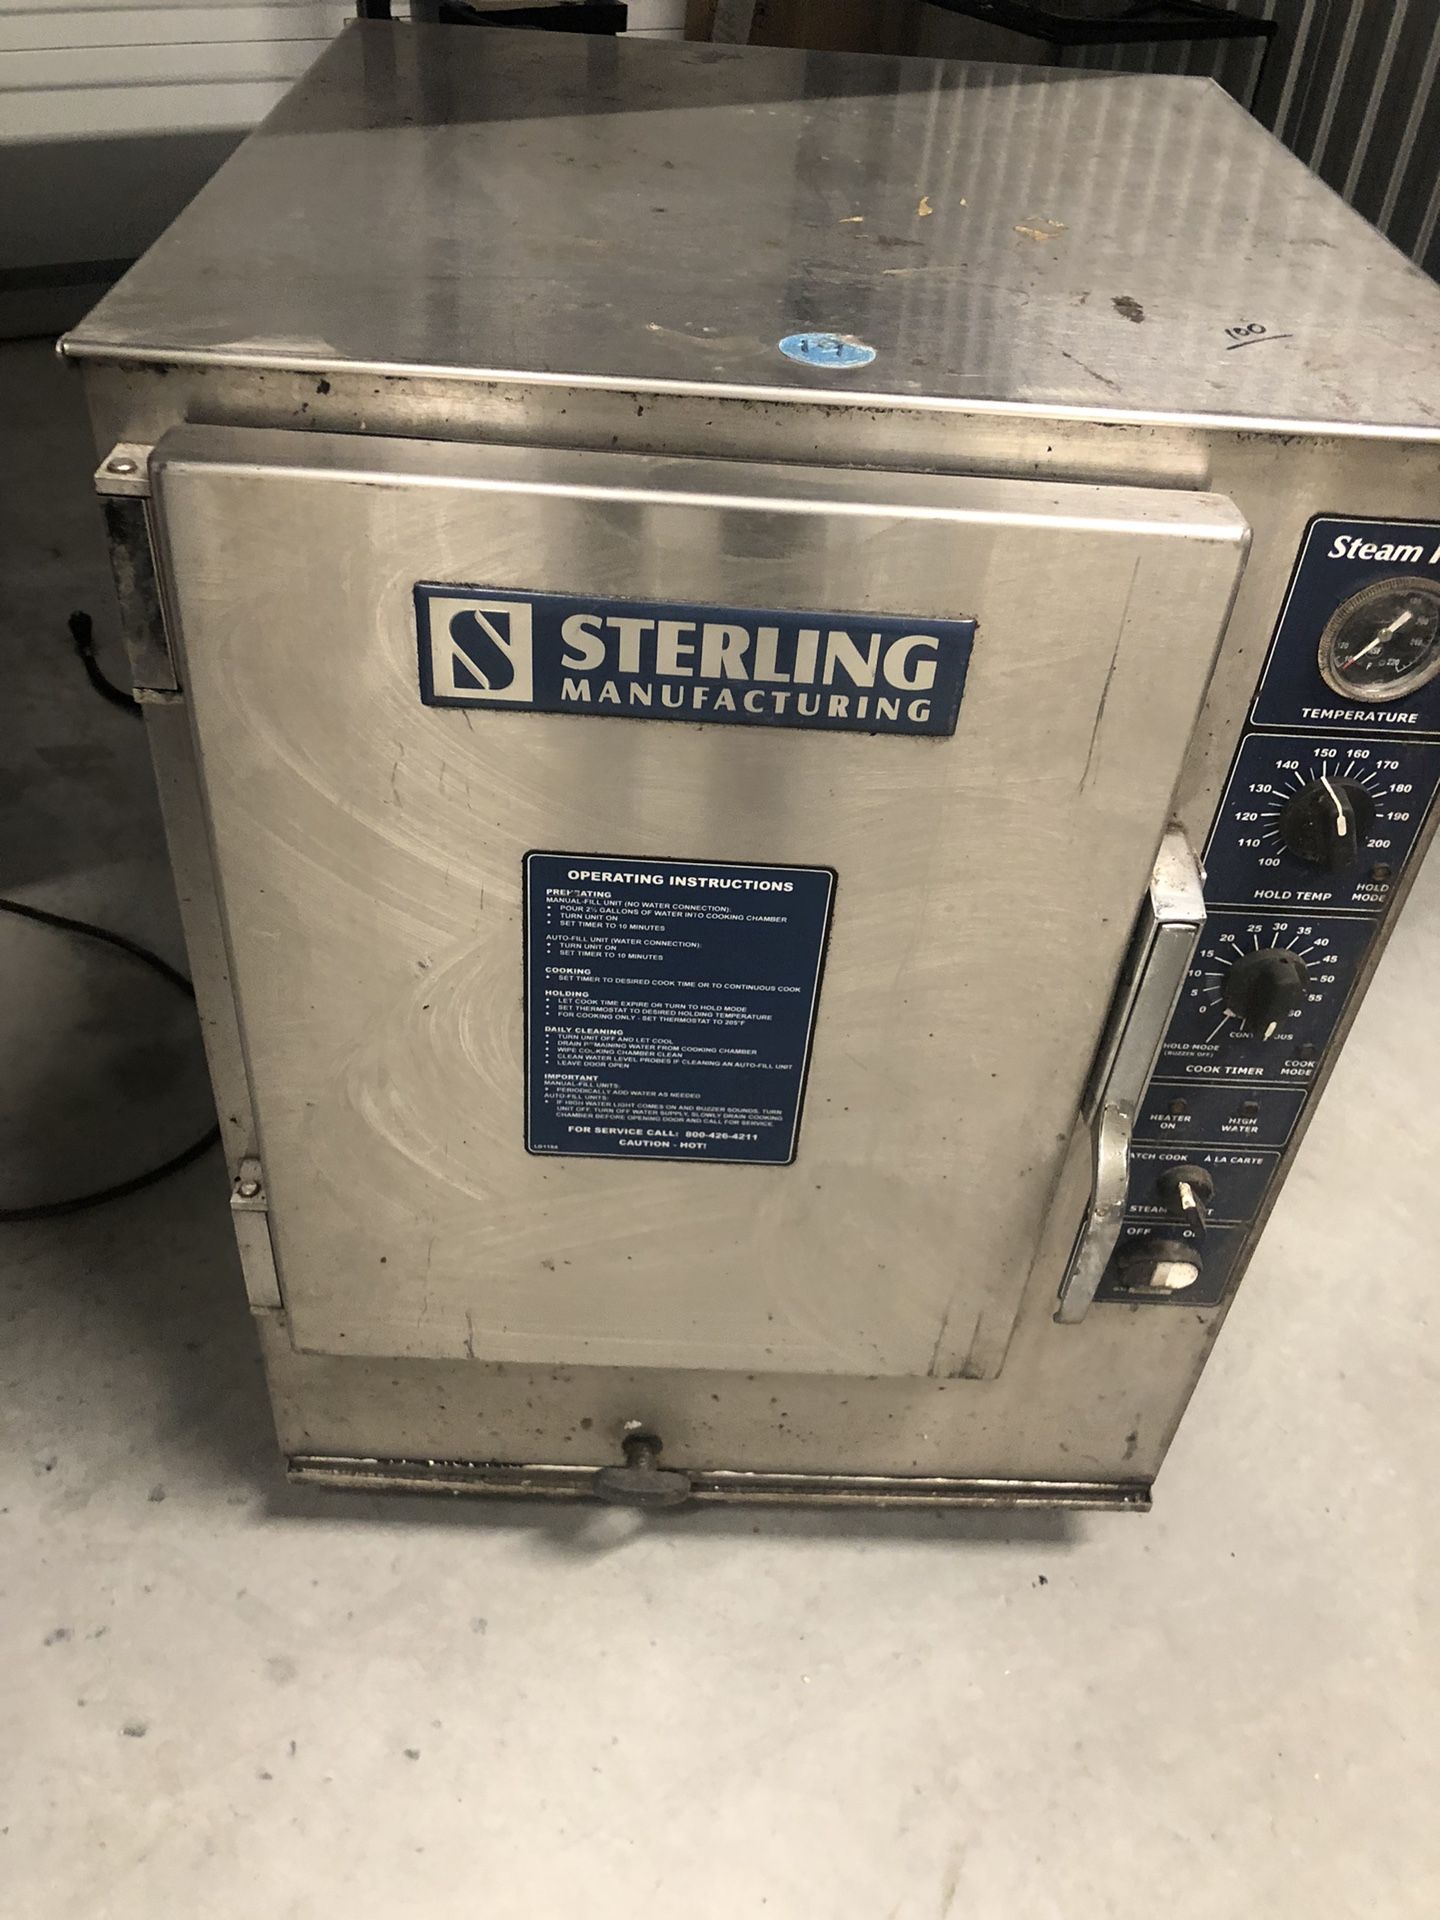 Sterling Steamer | Rated #1 In Speed And Efficiency The fastest most efficient Energy Star qualified Msrp 7,000